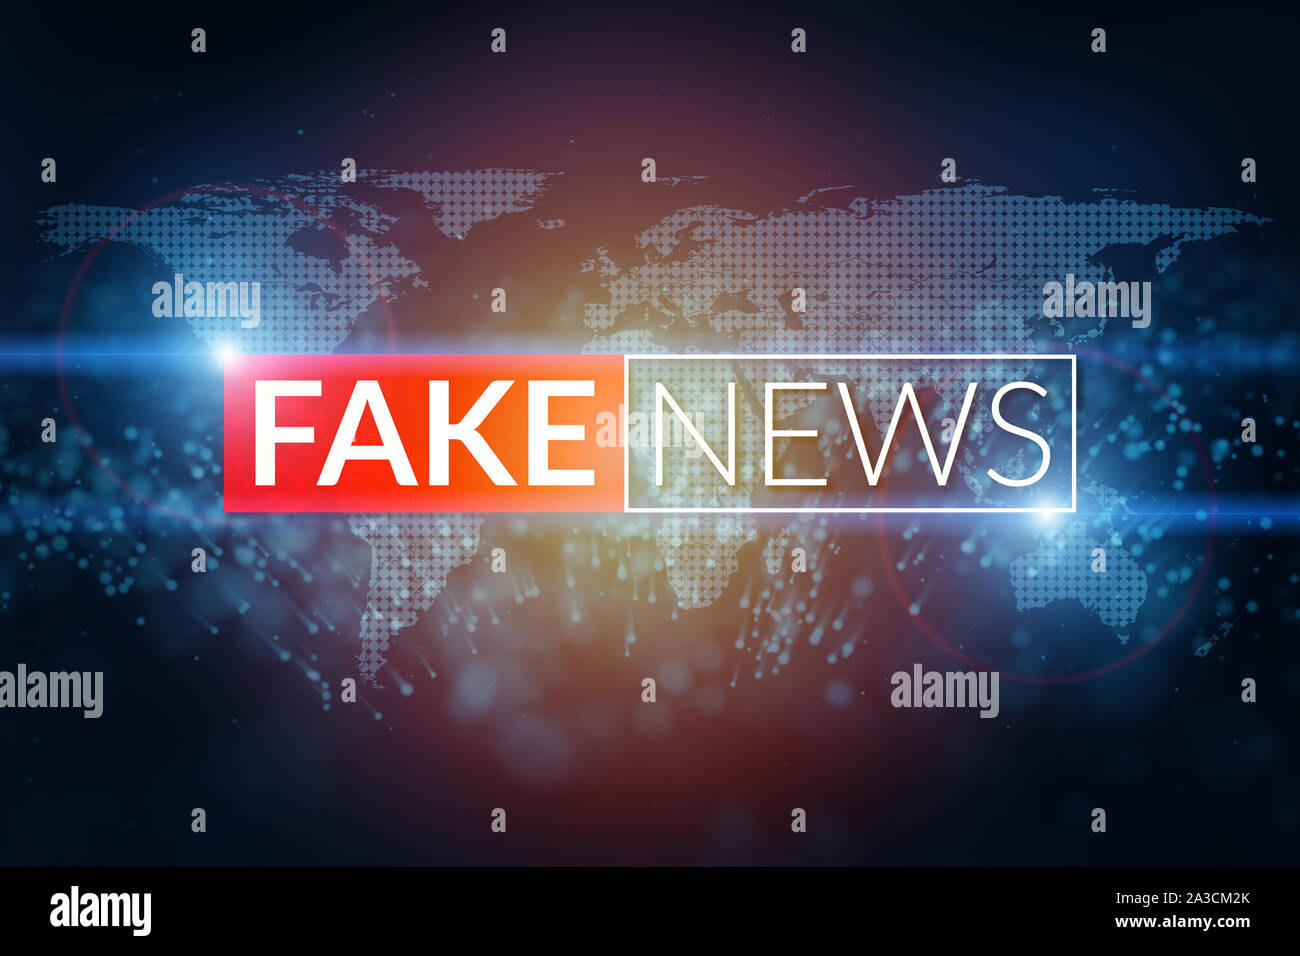 fake news live screen template on digital world map background. Stock Photo